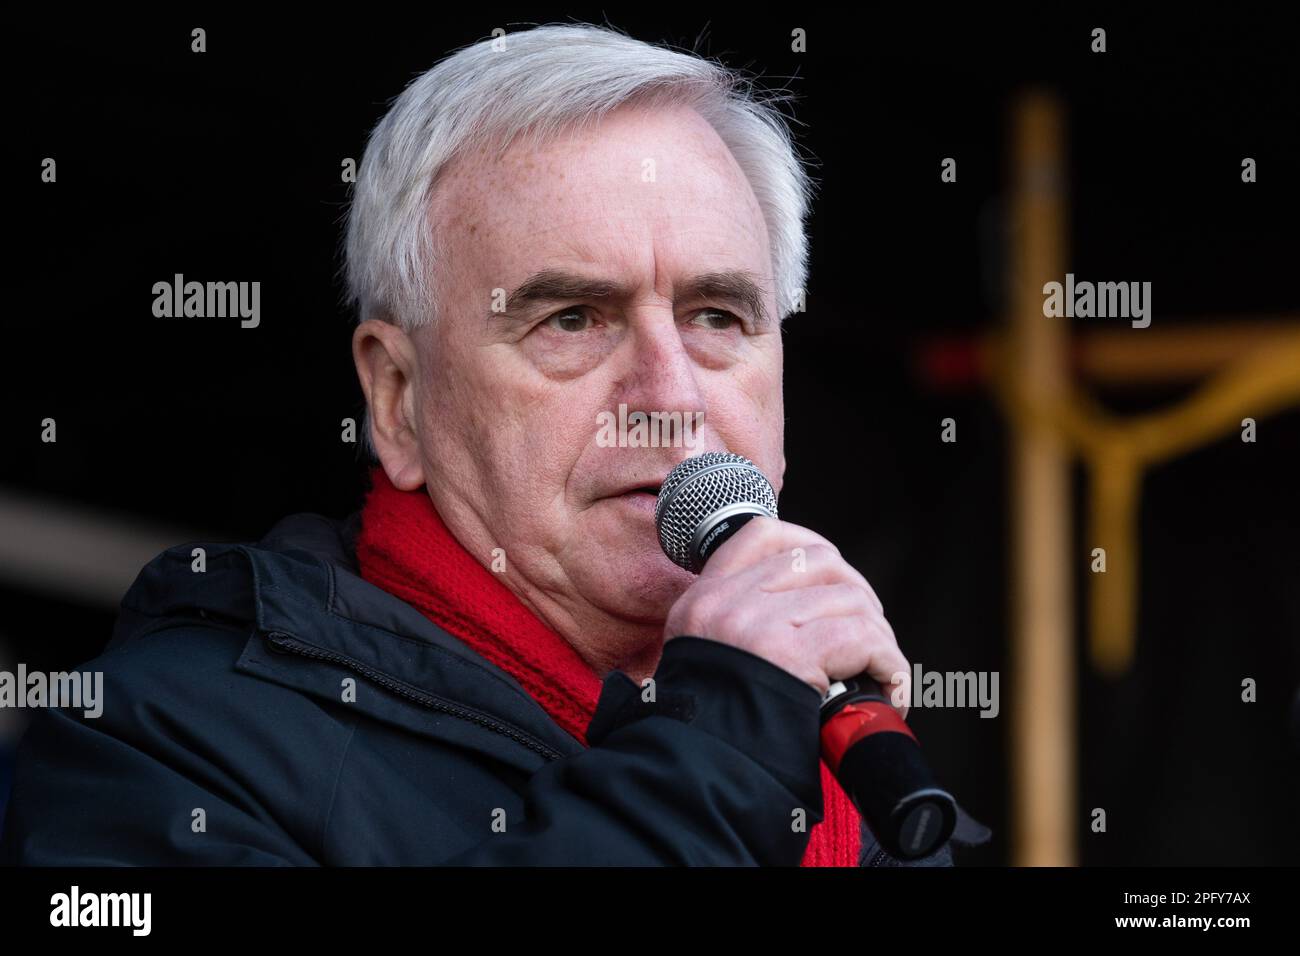 London, UK. 18th March, 2023. John McDonnell, Labour MP for Hayes and Harlington, addresses anti-racist campaigners at a rally outside Downing Street during a Resist Racism demonstration organised by Stand Up To Racism and the Trades Union Congress (TUC) as part of a global day of action against racism. Speakers expressed their anger at and opposition to the government’s controversial Illegal Migration Bill. Credit: Mark Kerrison/Alamy Live News Stock Photo